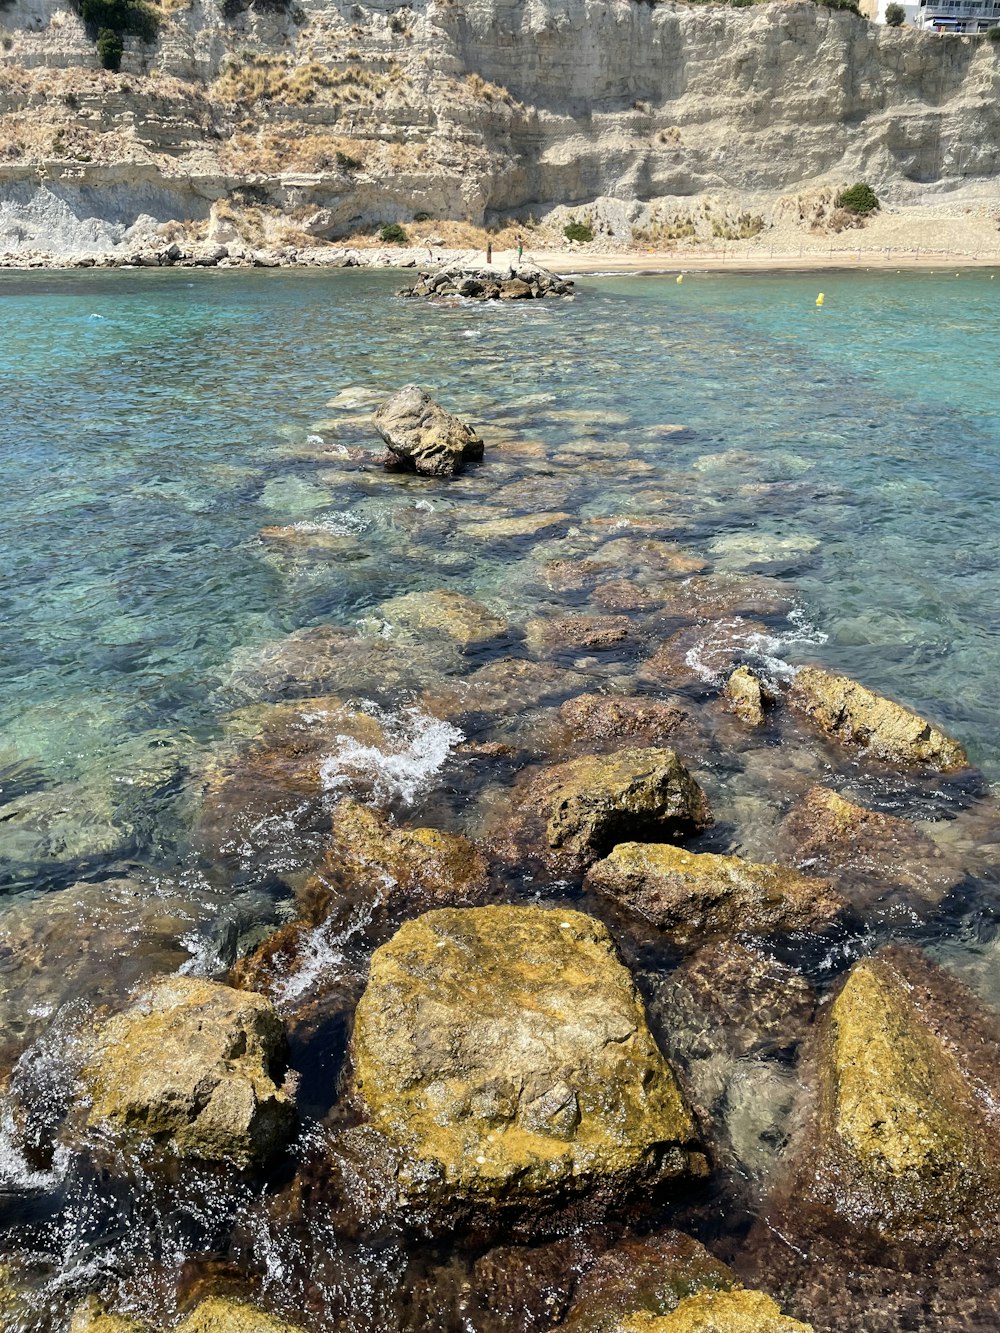 a rocky beach with a body of water in the background